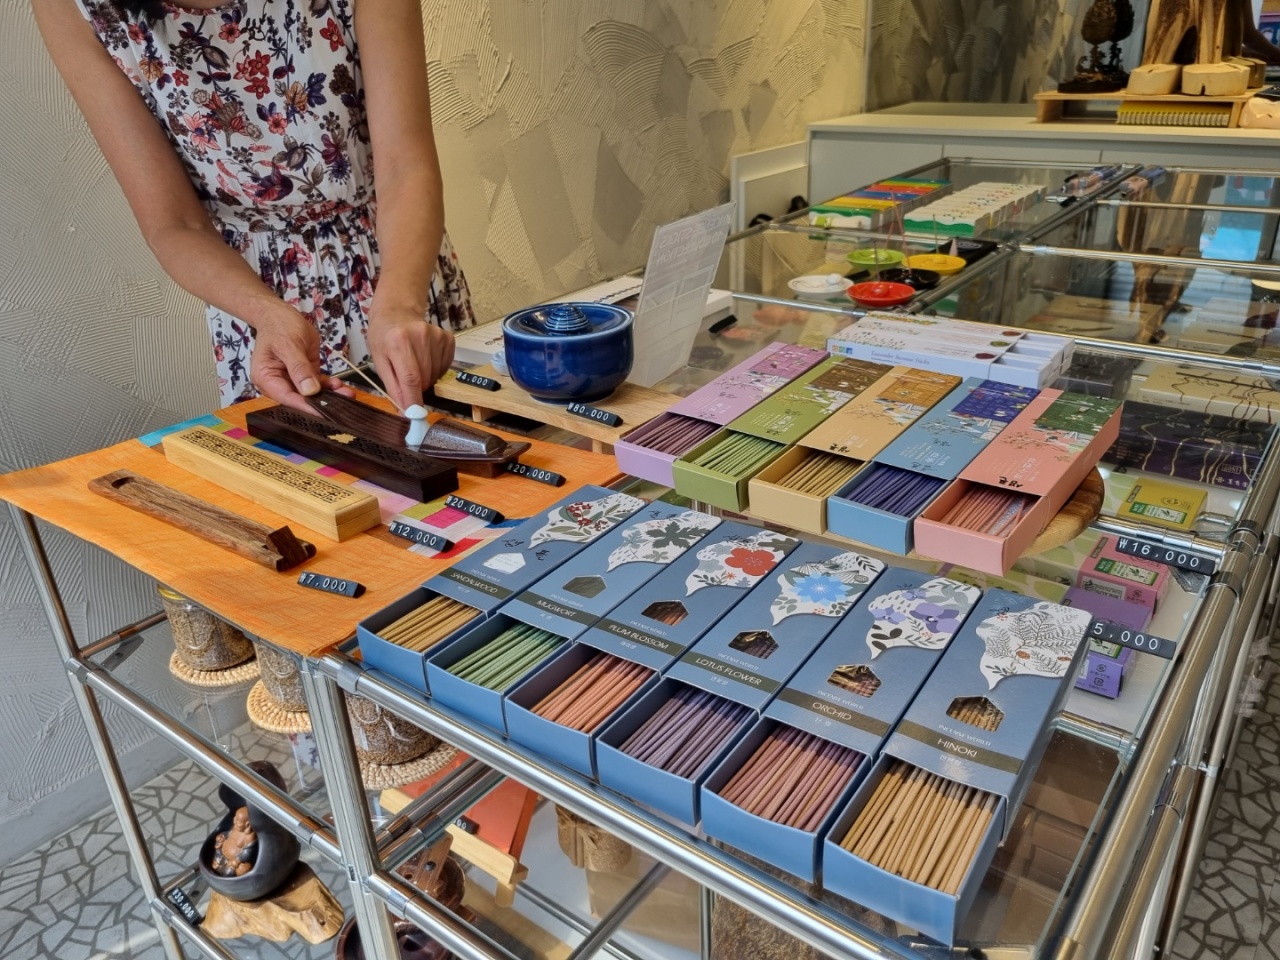 Incense sticks and holders are displayed at a store run by Incense World in Insa-dong, Jongno-gu in Seoul on Tuesday. (The Korea Herald)